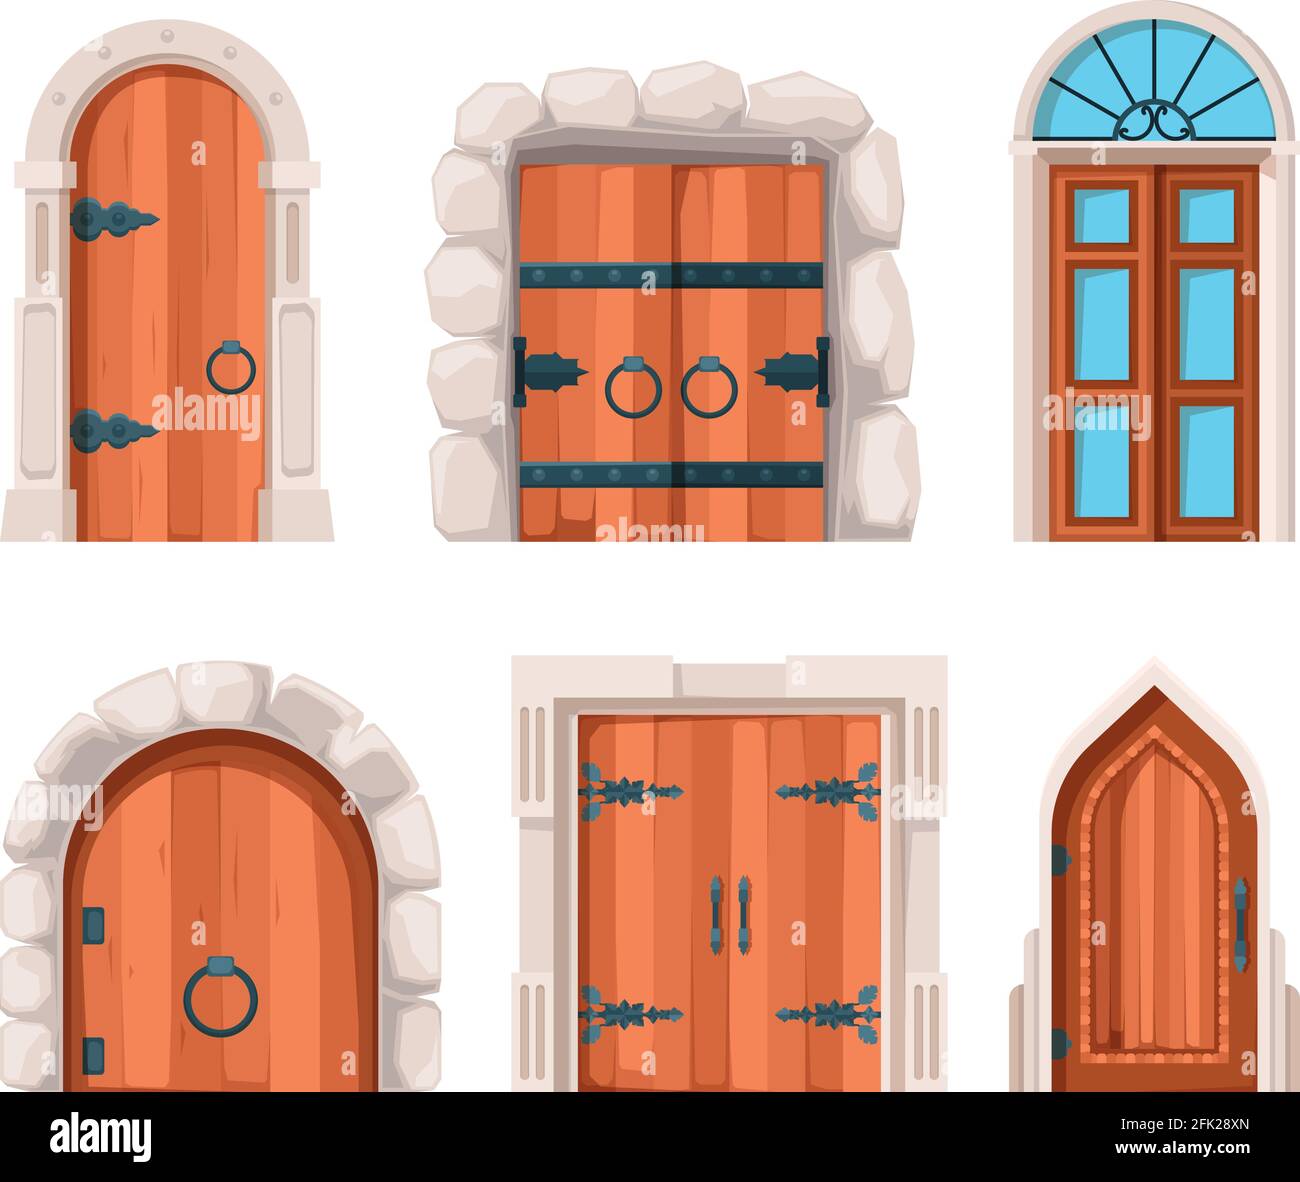 Ancient doors. Wooden stone medieval and old building doors and gates from castles vector designs Stock Vector